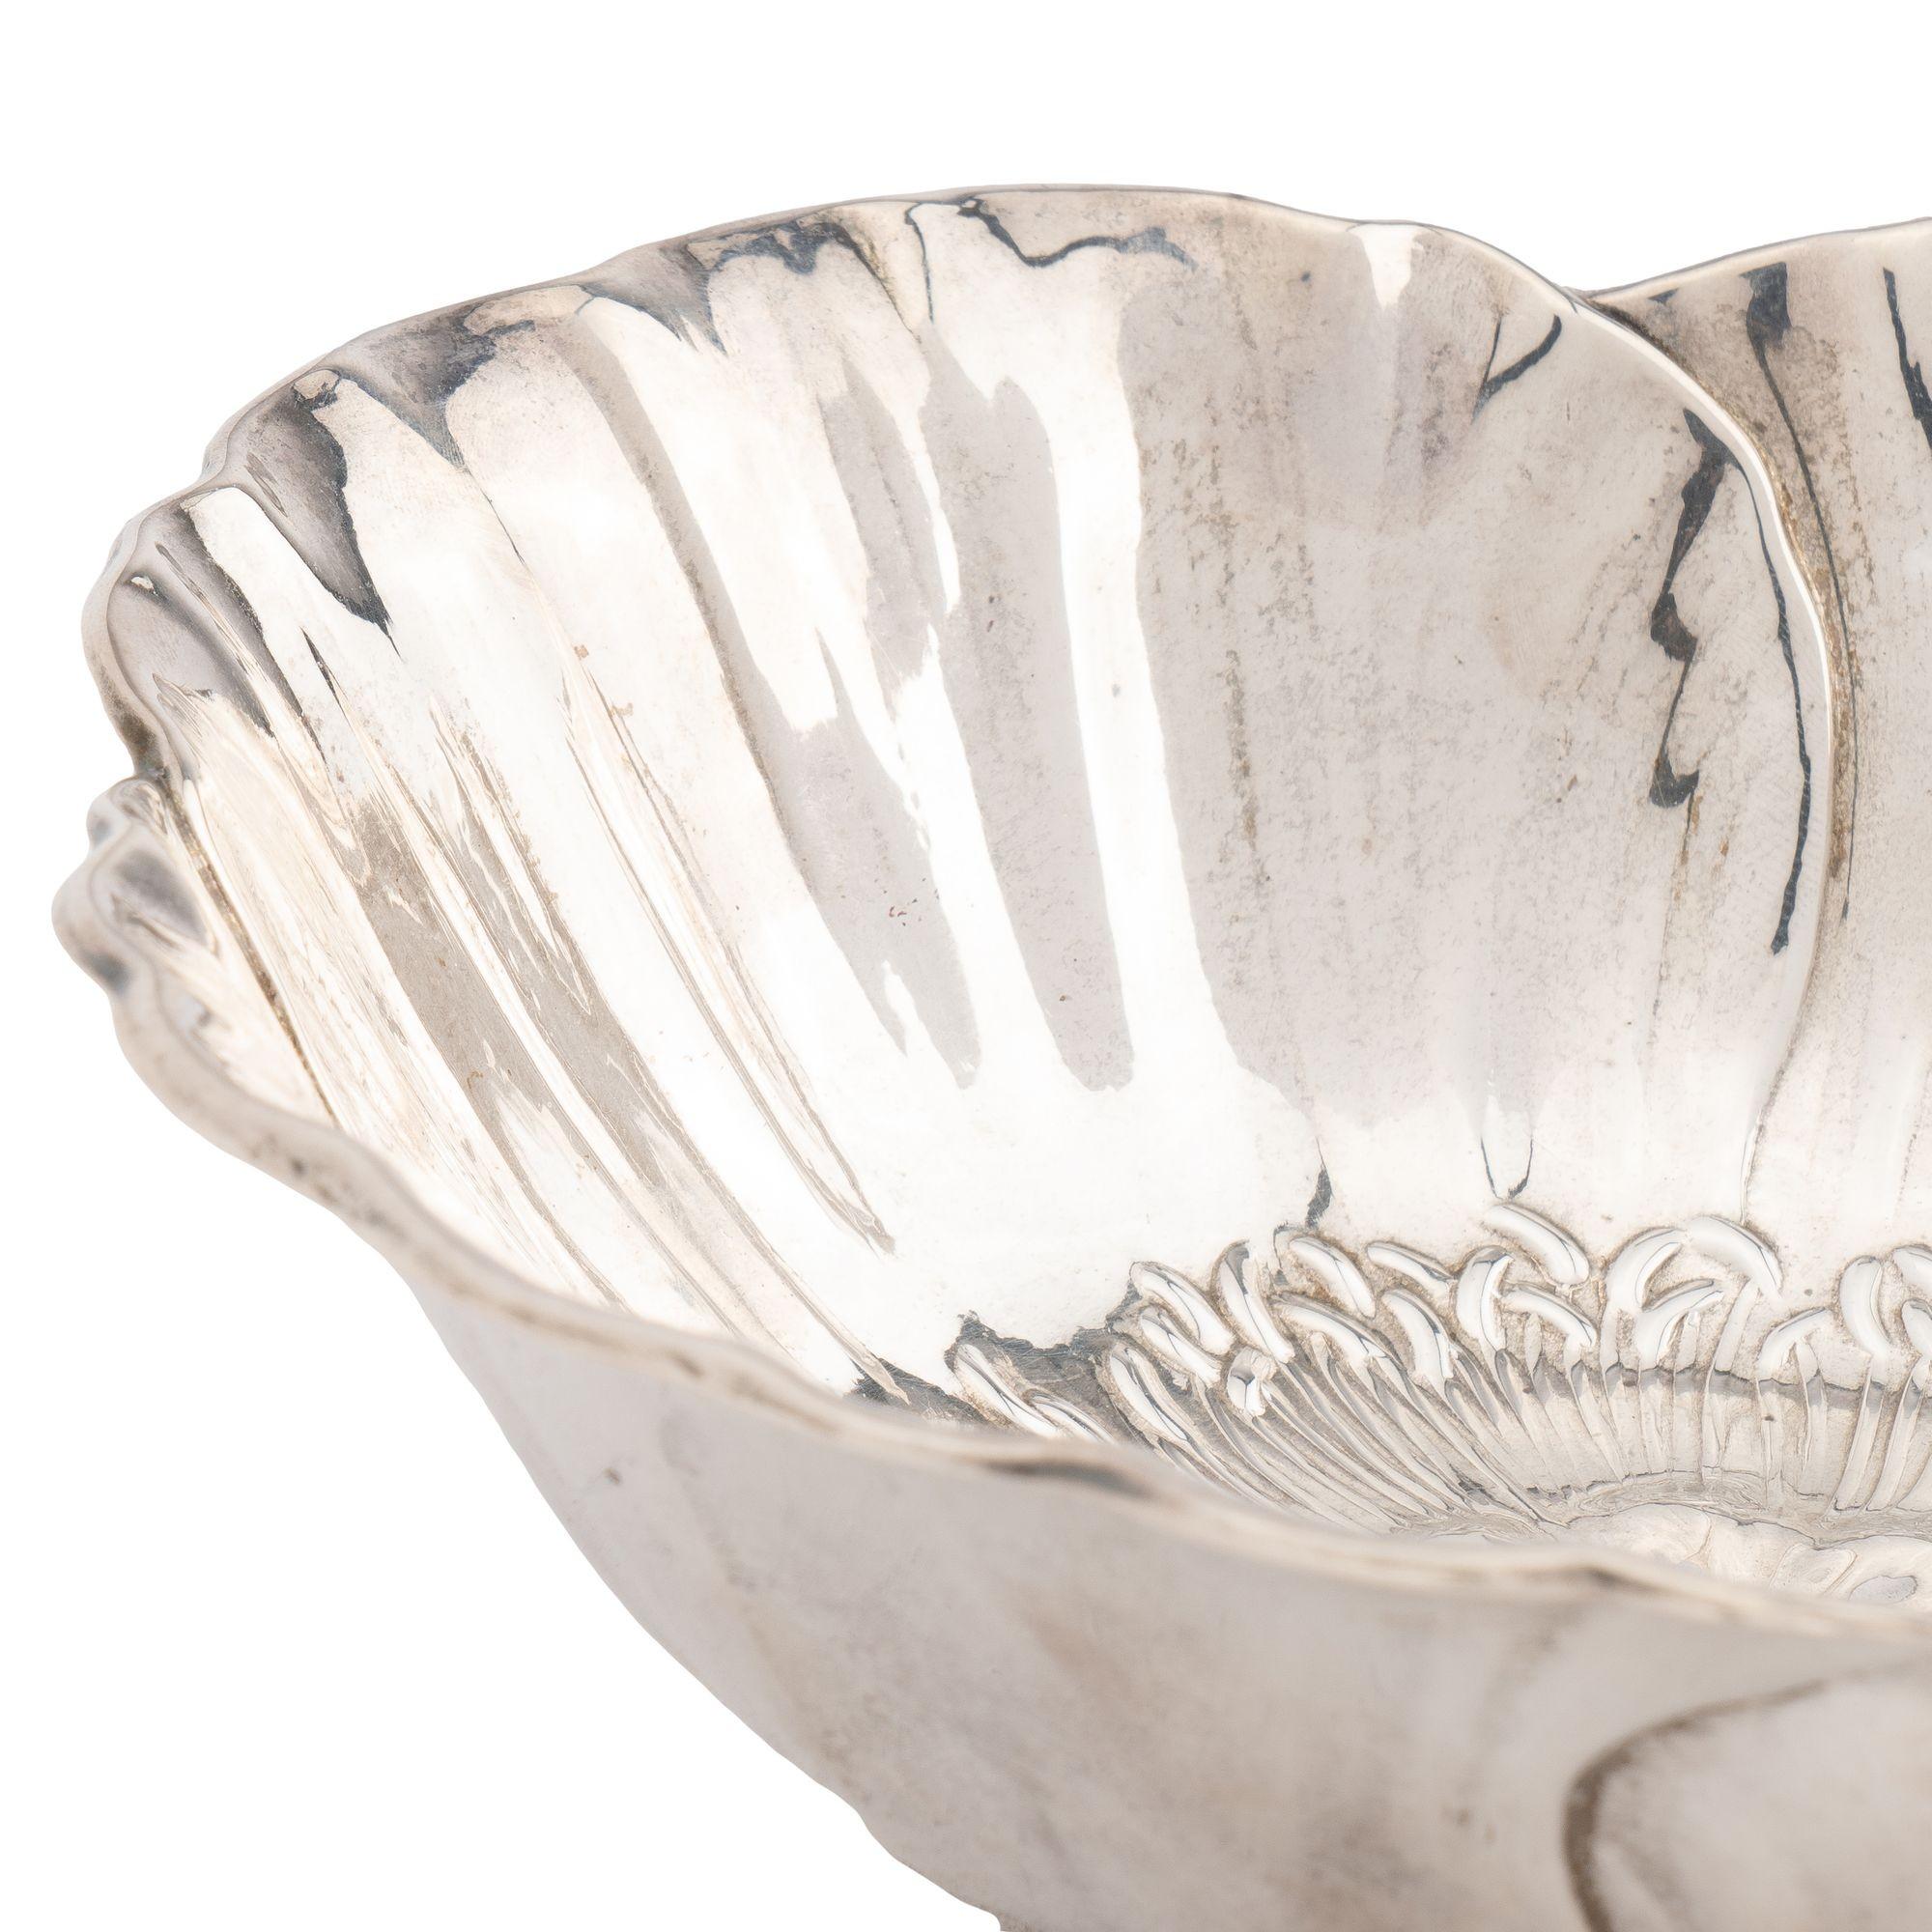 American Hand-Hammered Sterling Silver Bowl by Meriden Britannia Co '1893' For Sale